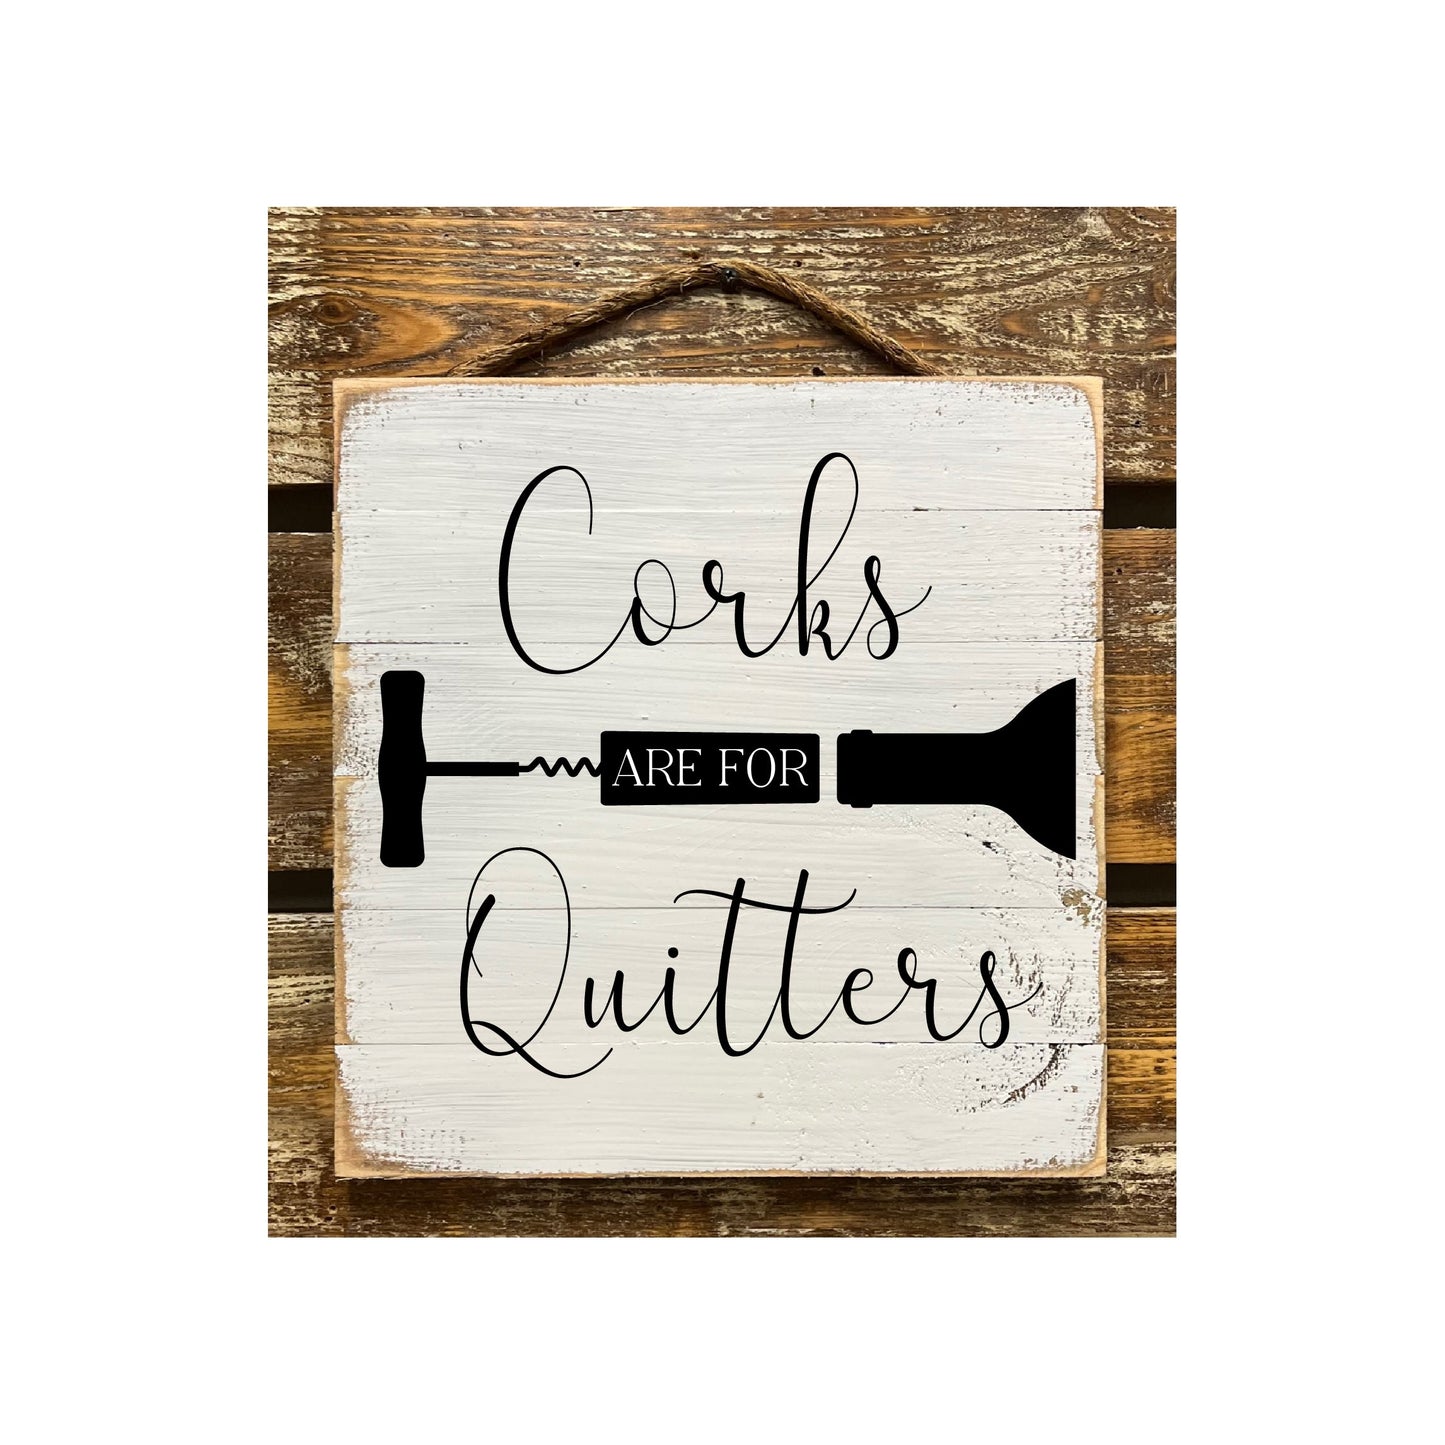 Corks Are For Quitters